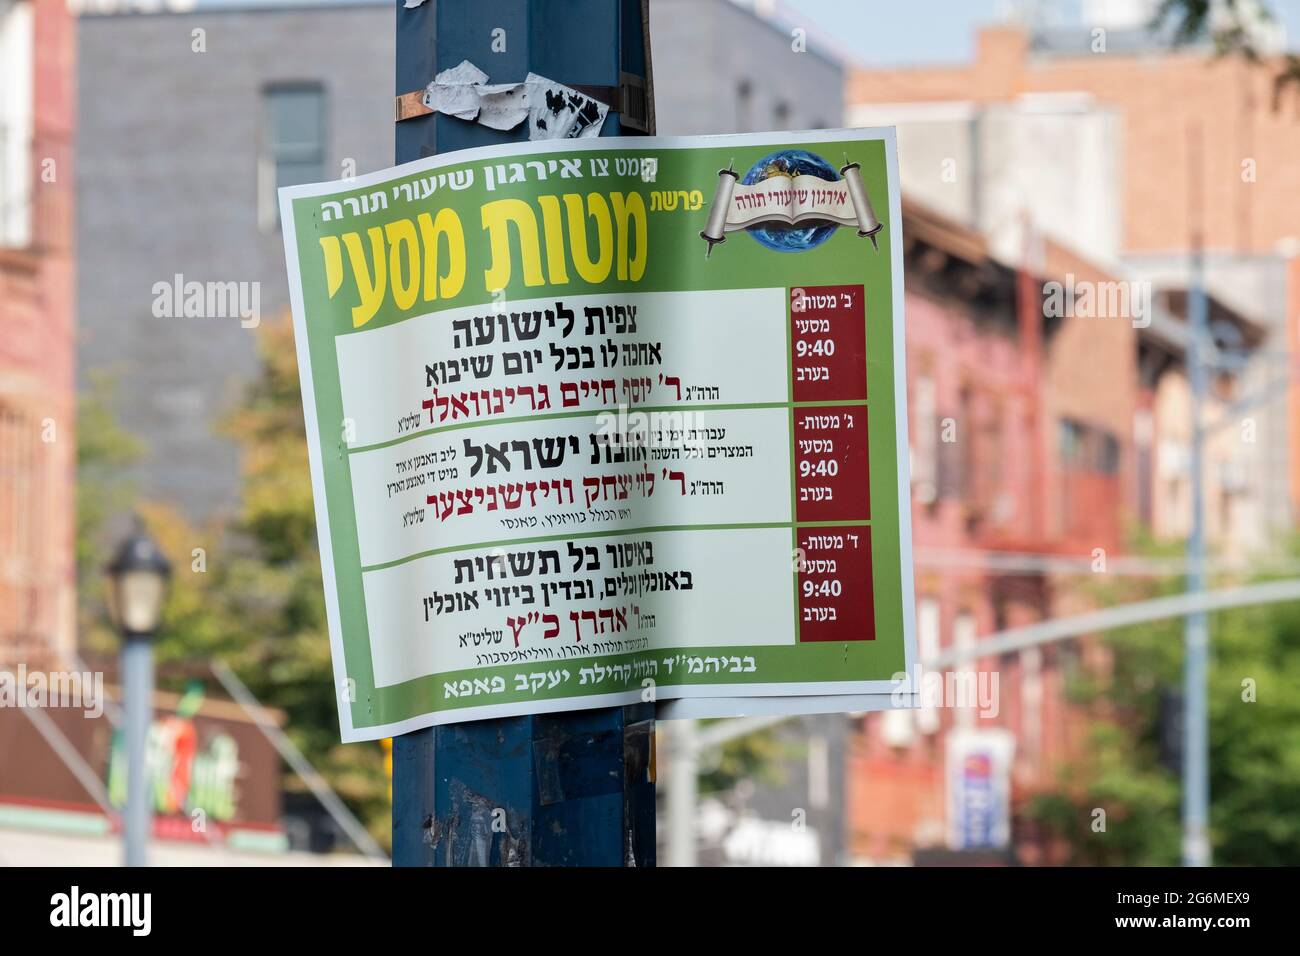 A Hebrew & Yiddish sign on Lee Avenue listing a series of lectures on the next weekly Torah reading sponsored by the pupa hasidic group. In Brooklyn. Stock Photo